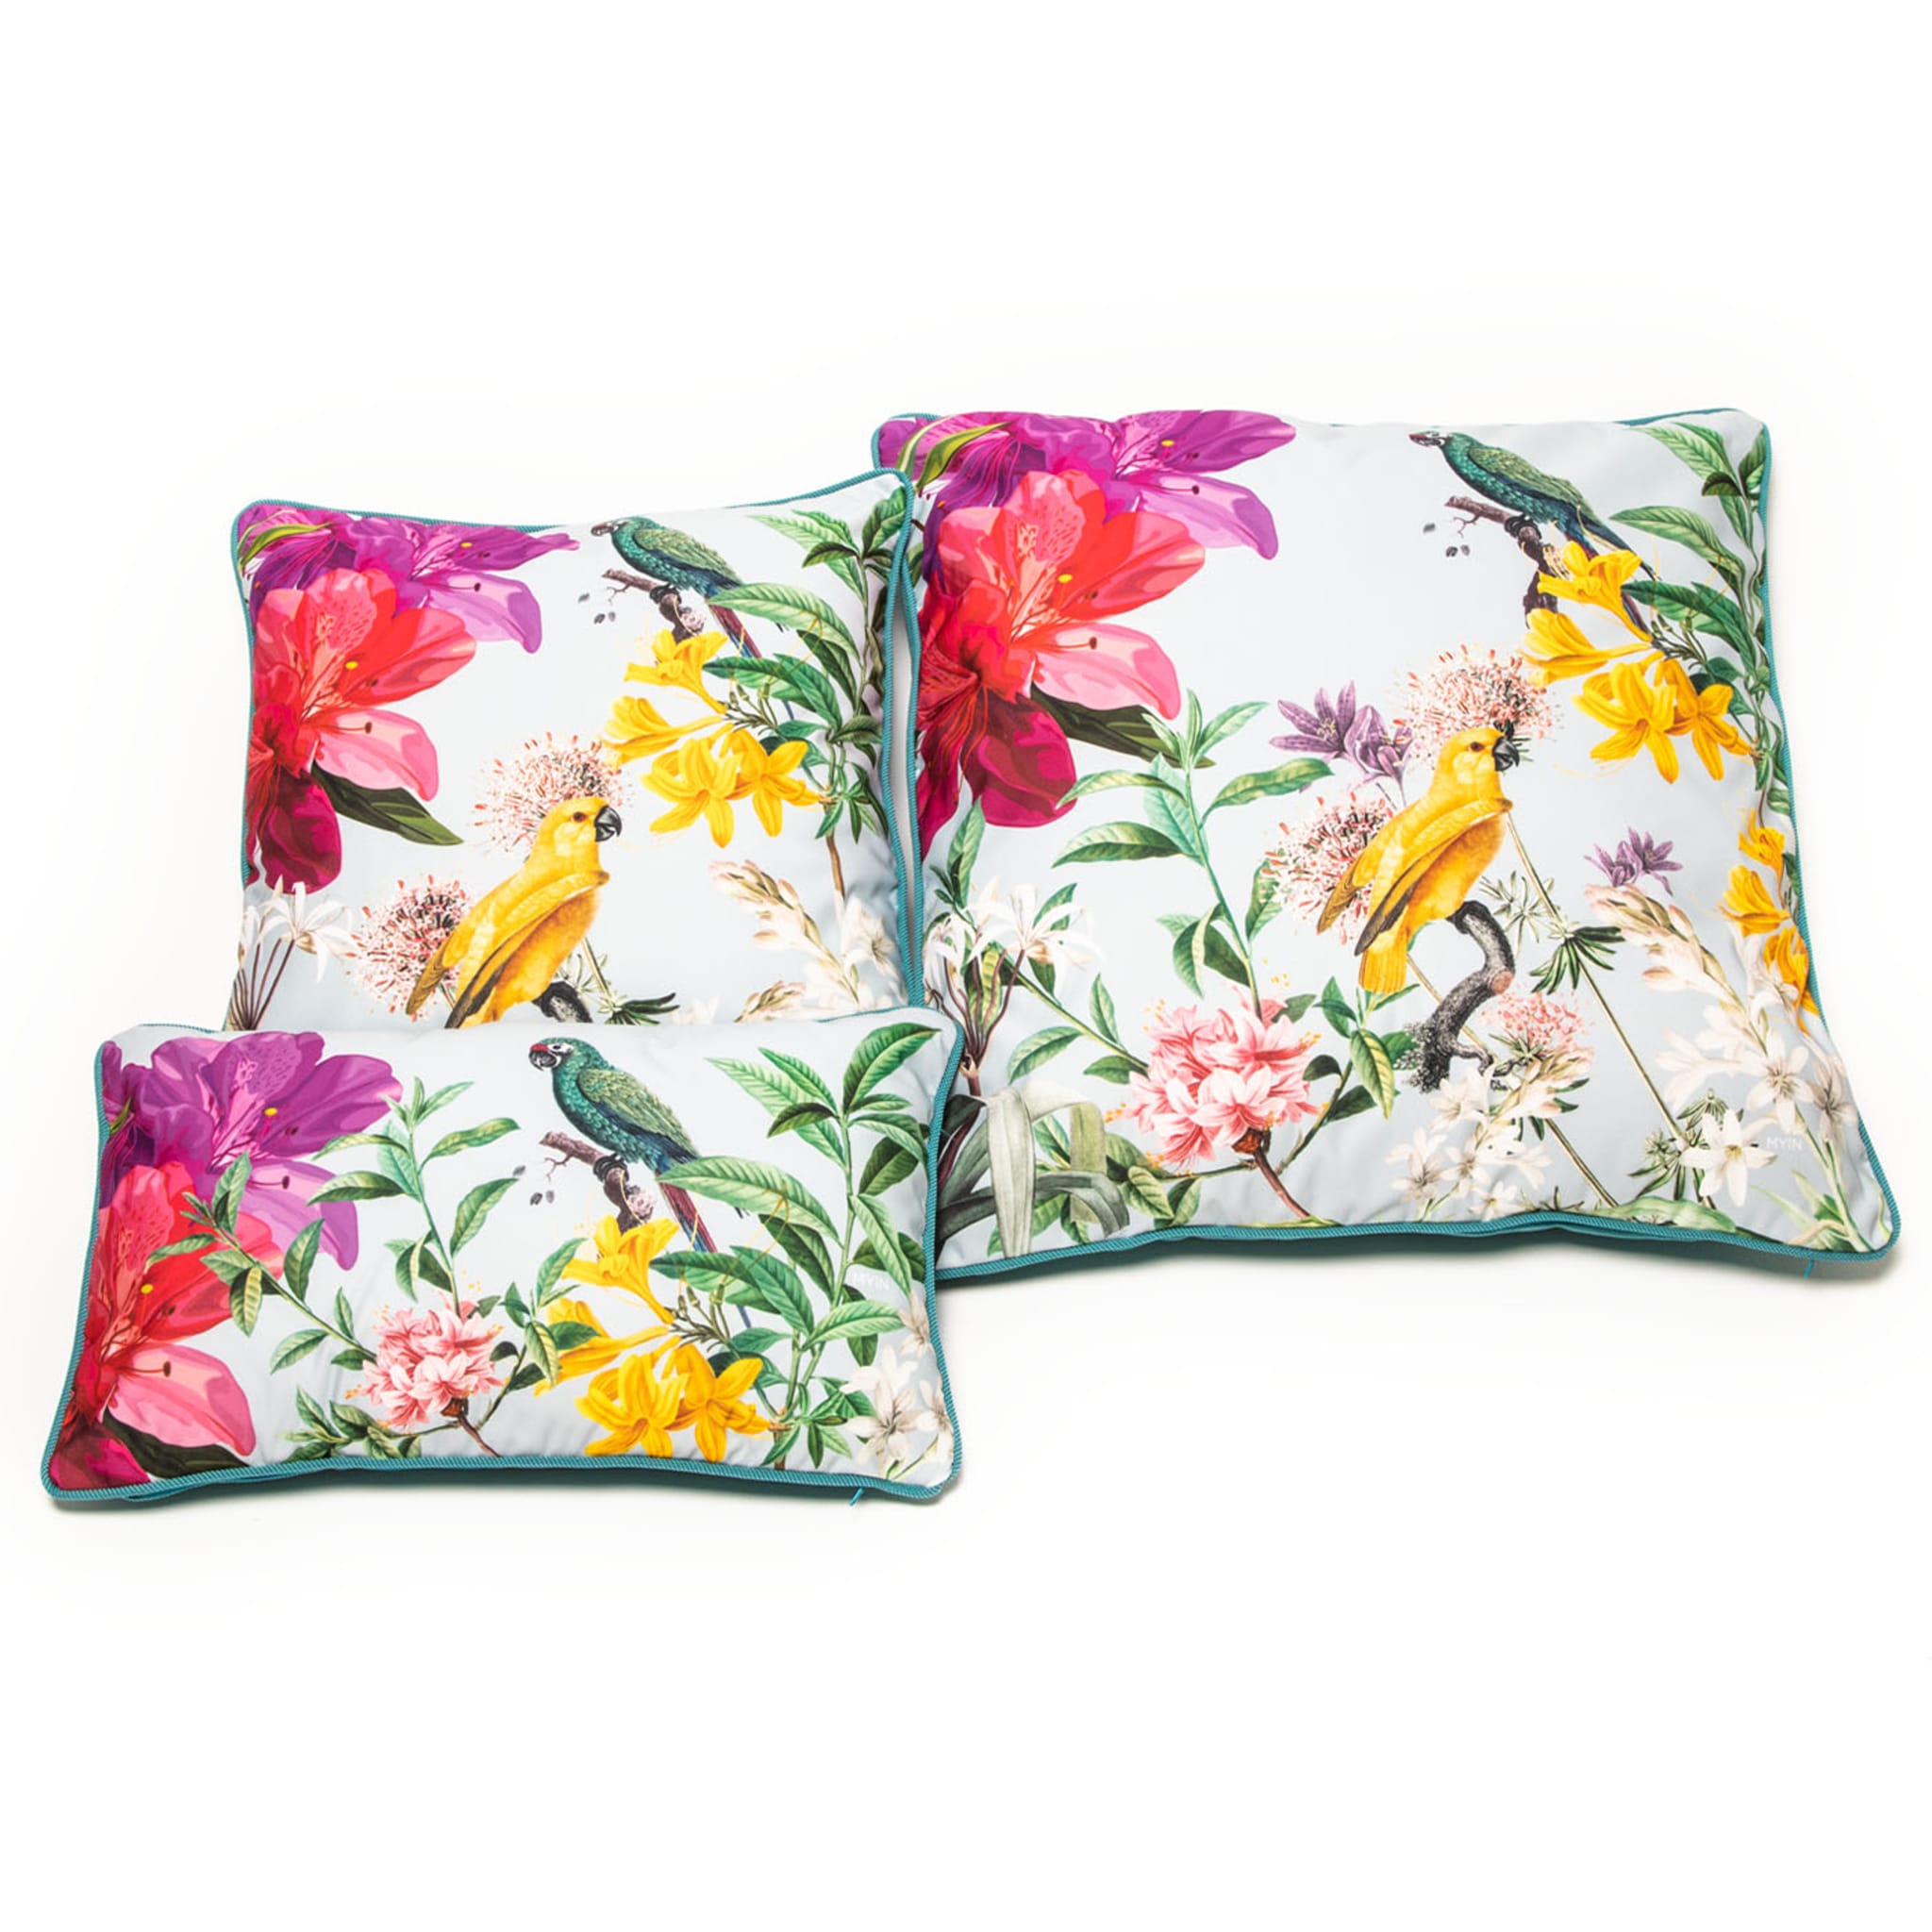 Mia Spring Waterproof Large Cushion by Luciana Gomez - Alternative view 2